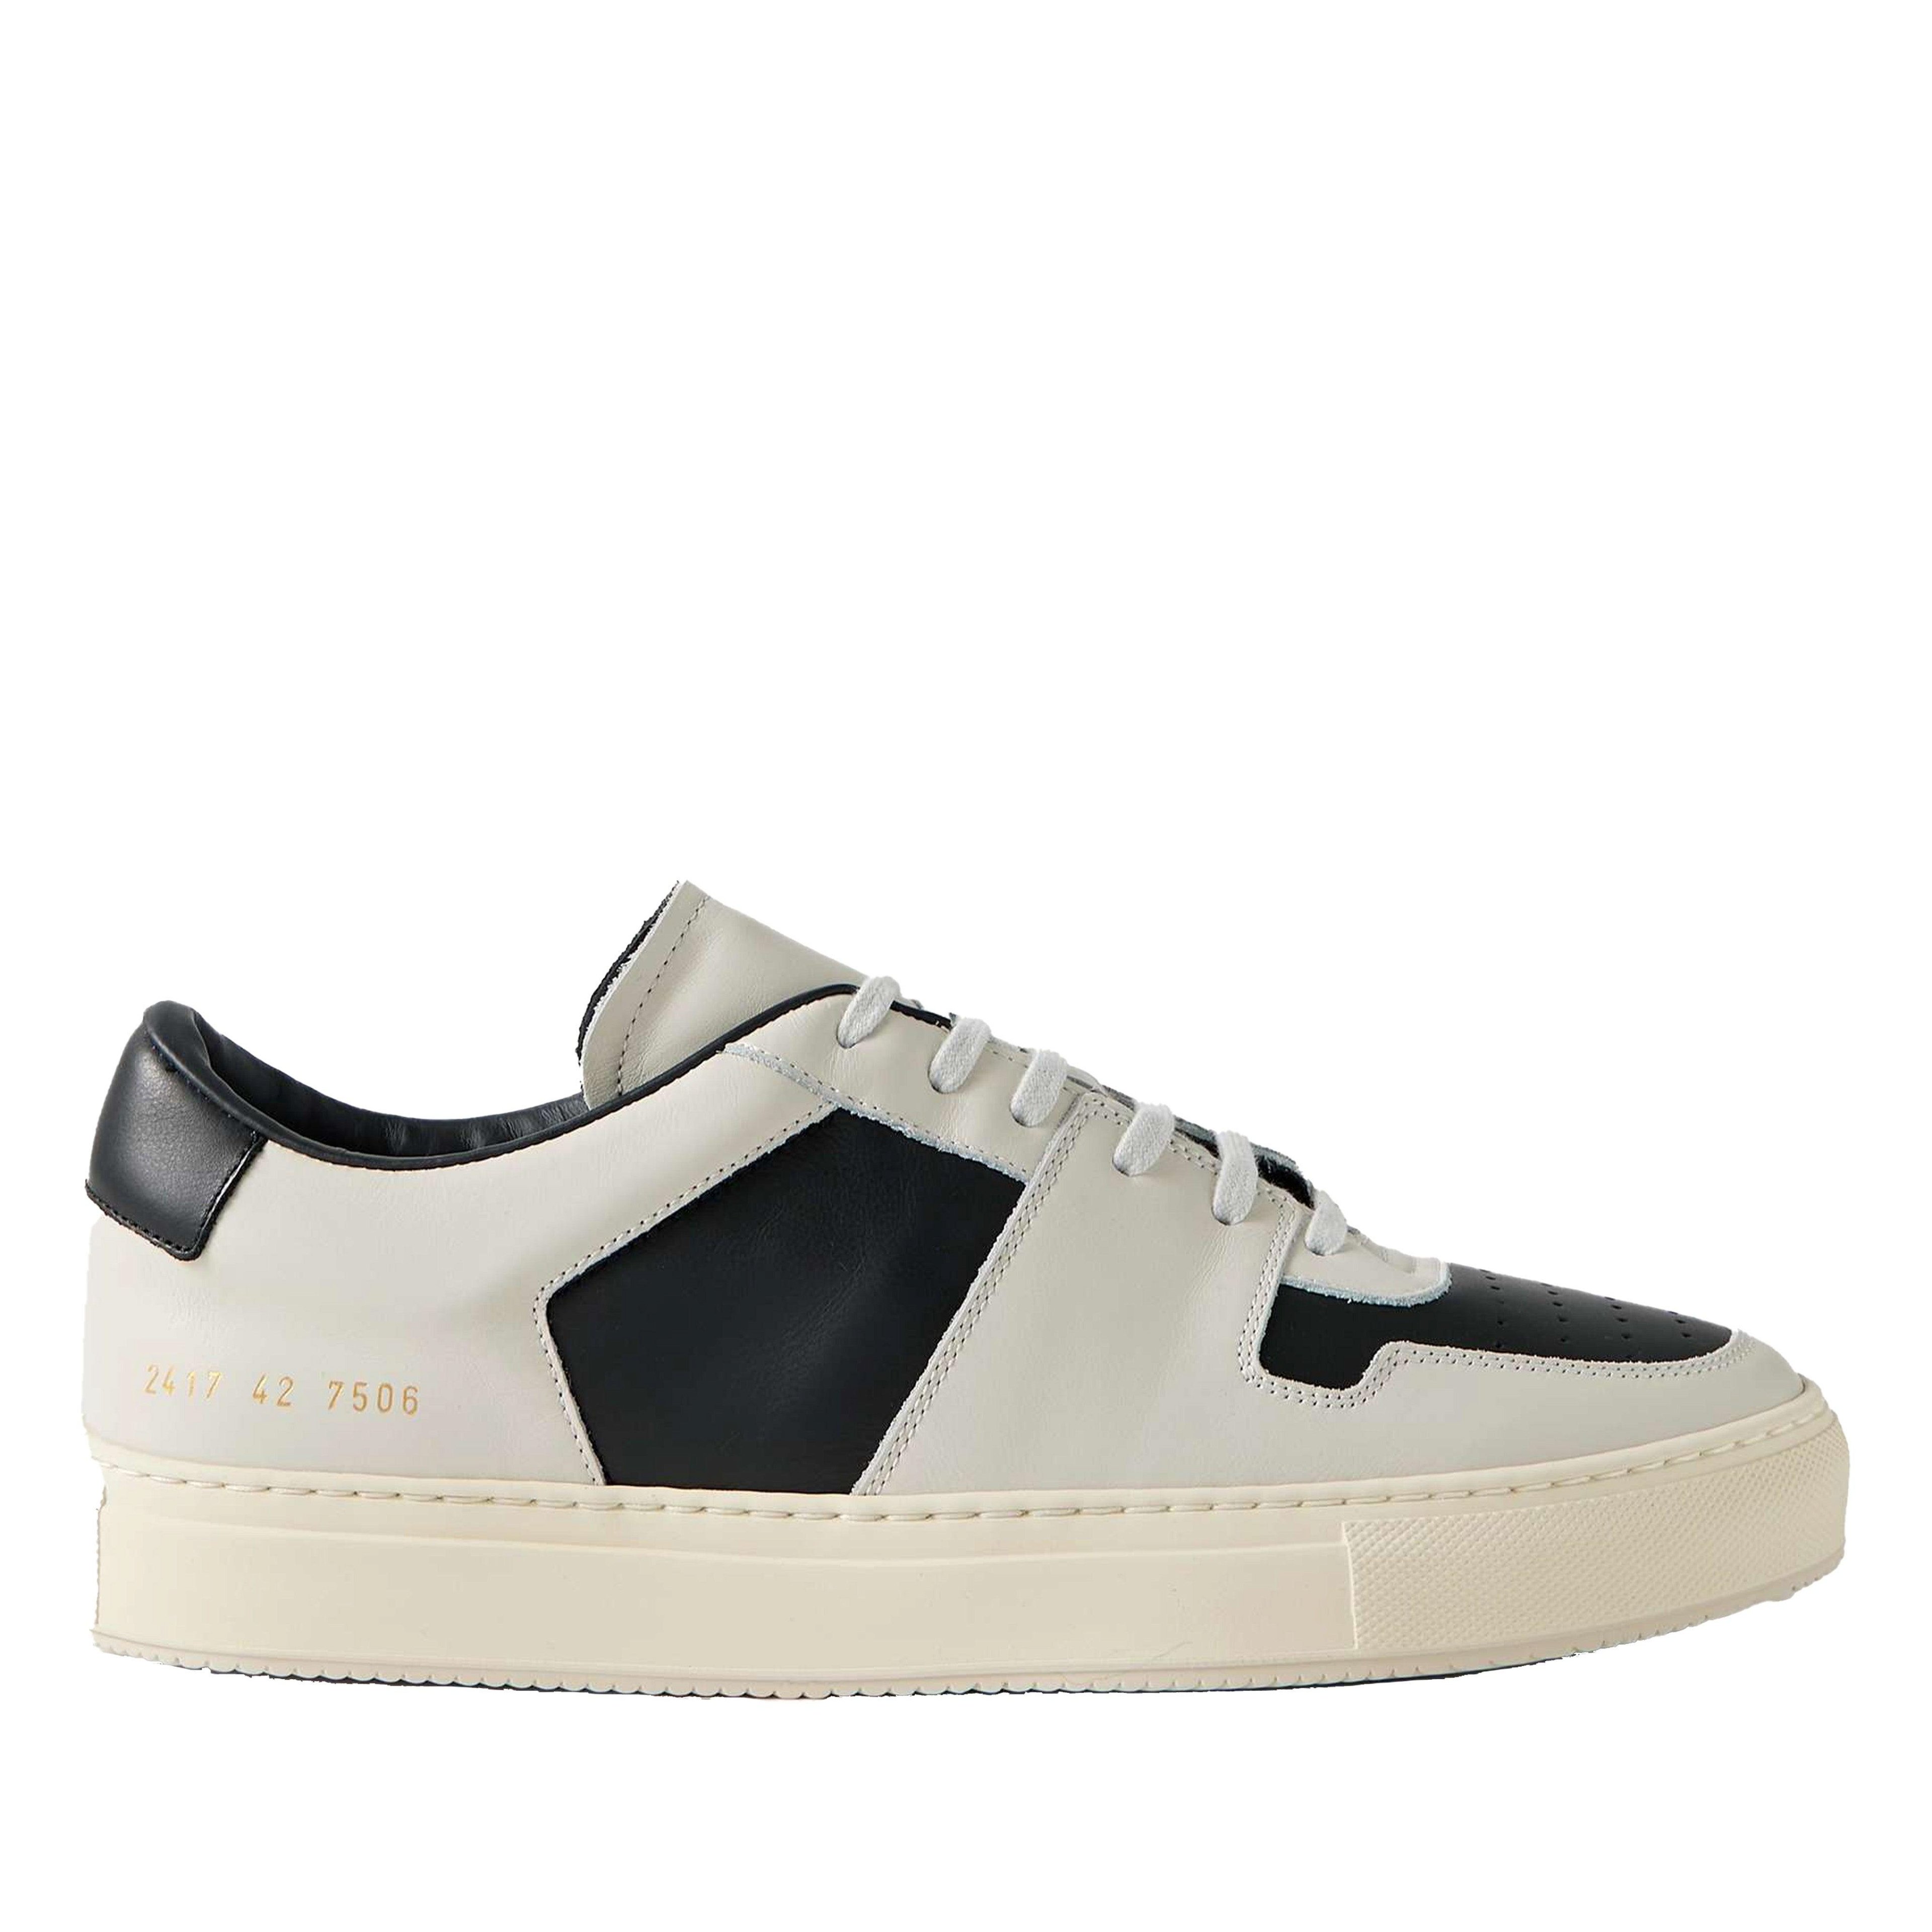 Common Projects - Decades Sneakers - (Black/White) by COMMON PROJECTS